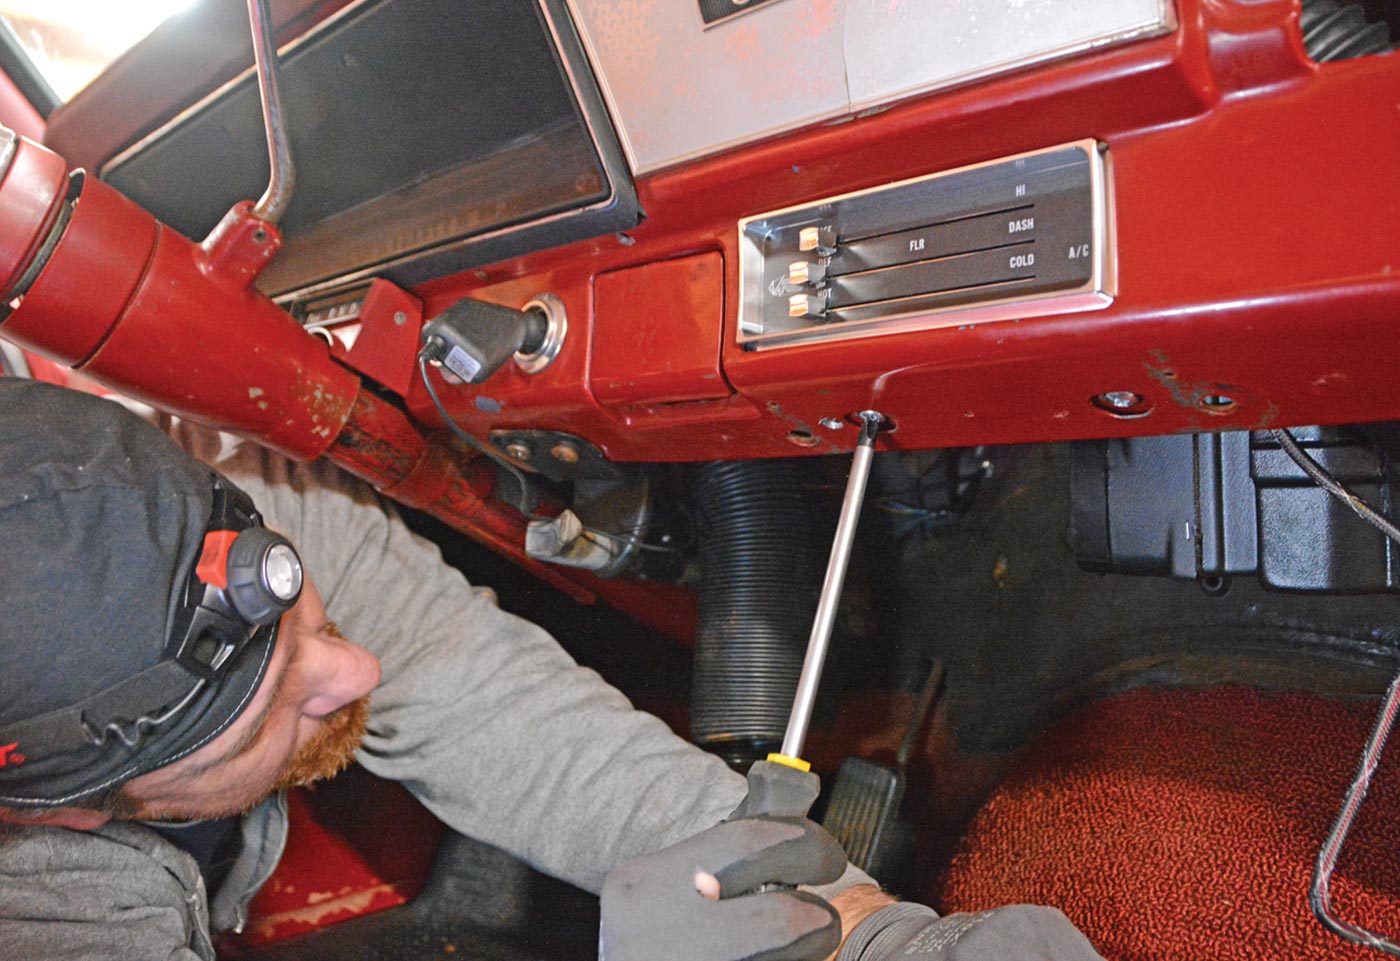 the mechanic secures the control panel in place using the original Phillips head screws